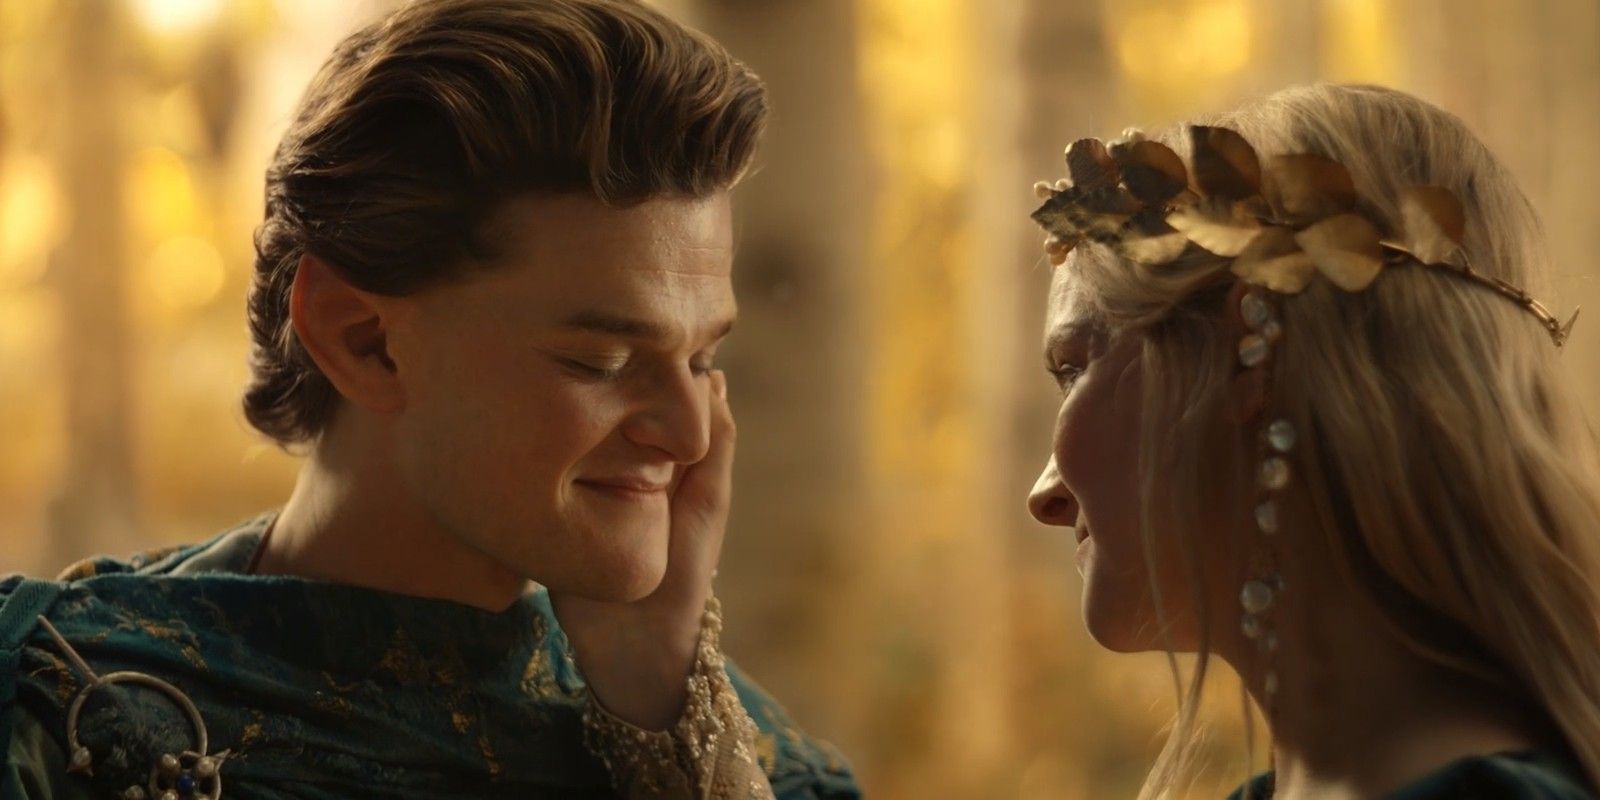 Robert-Aramayo-as-Elrond-and-Morfydd-Clark-as-Galadriel-in-Lord-of-the-Rings-the-Rings-of-Power.JPG